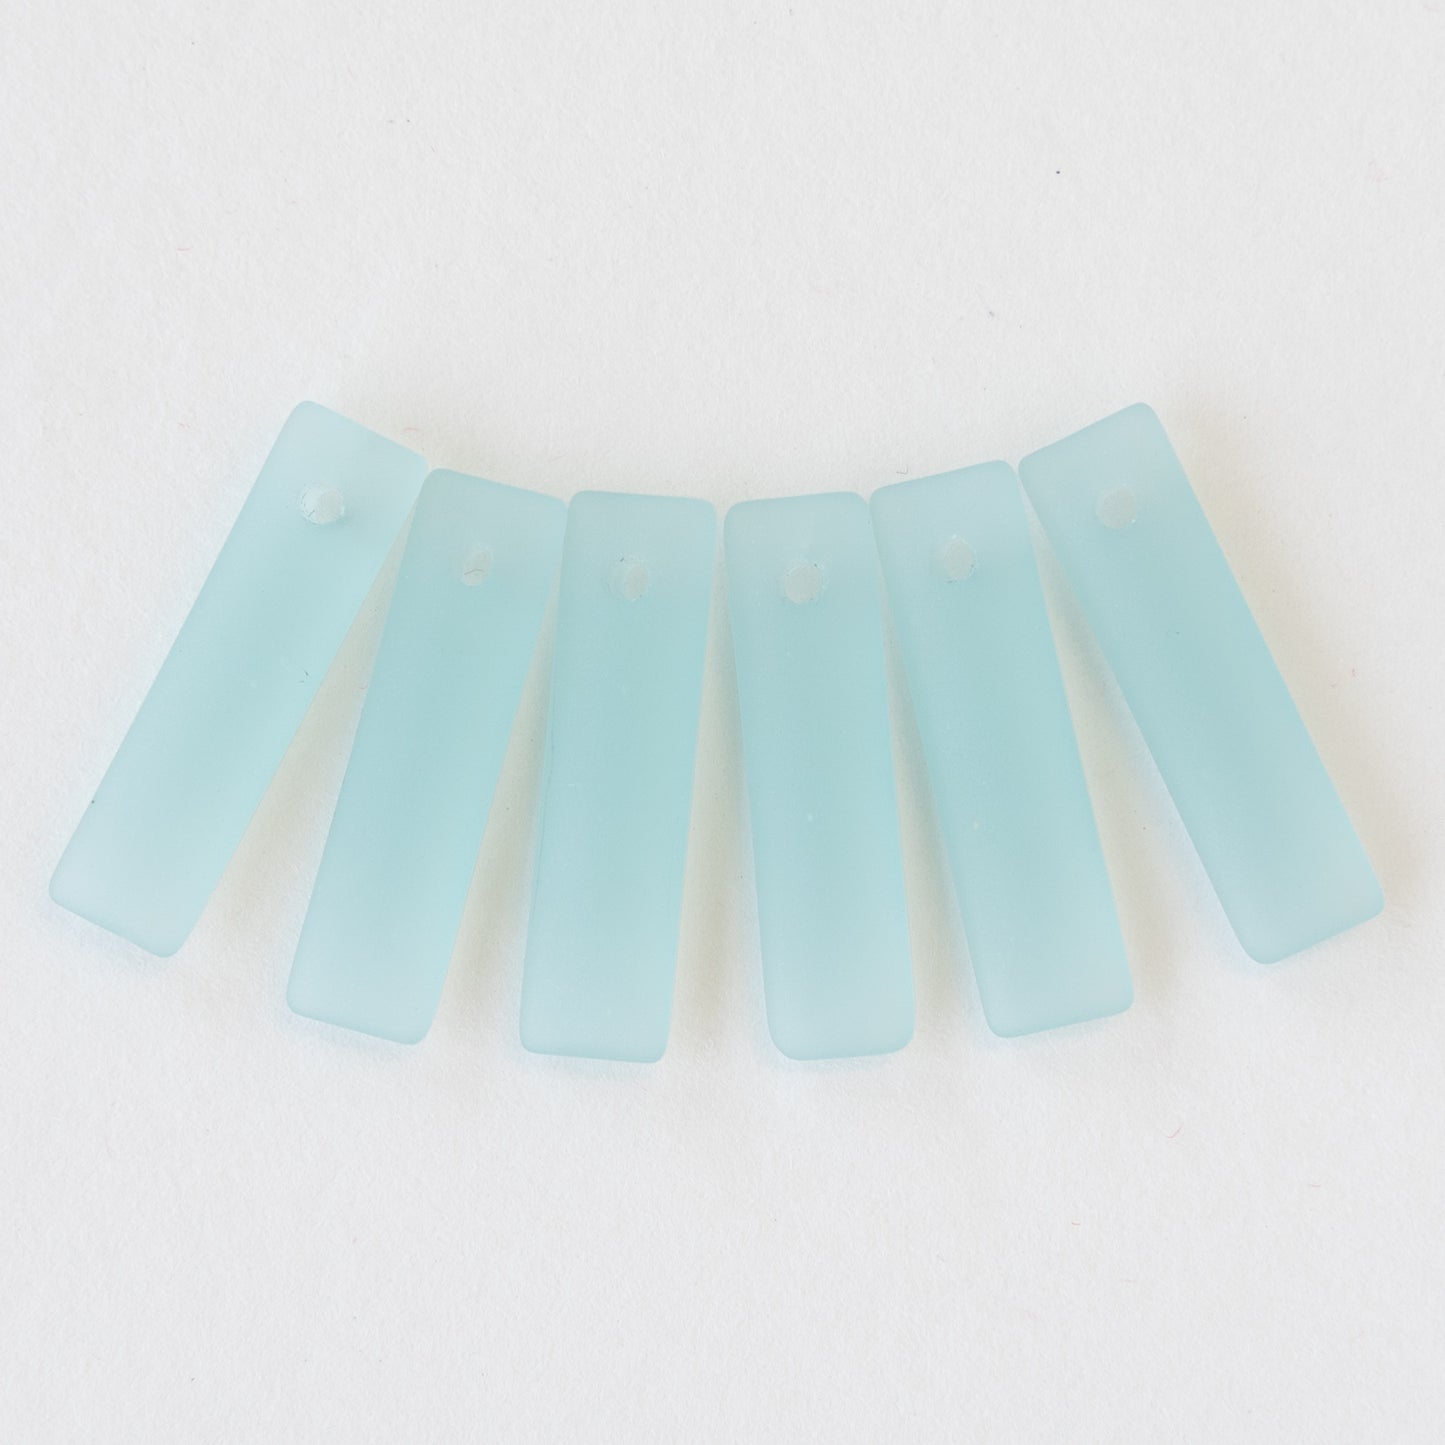 Load image into Gallery viewer, 22mm Frosted Glass Rectangle Pendants - Semi Opaque Light Seafoam - 6 beads
